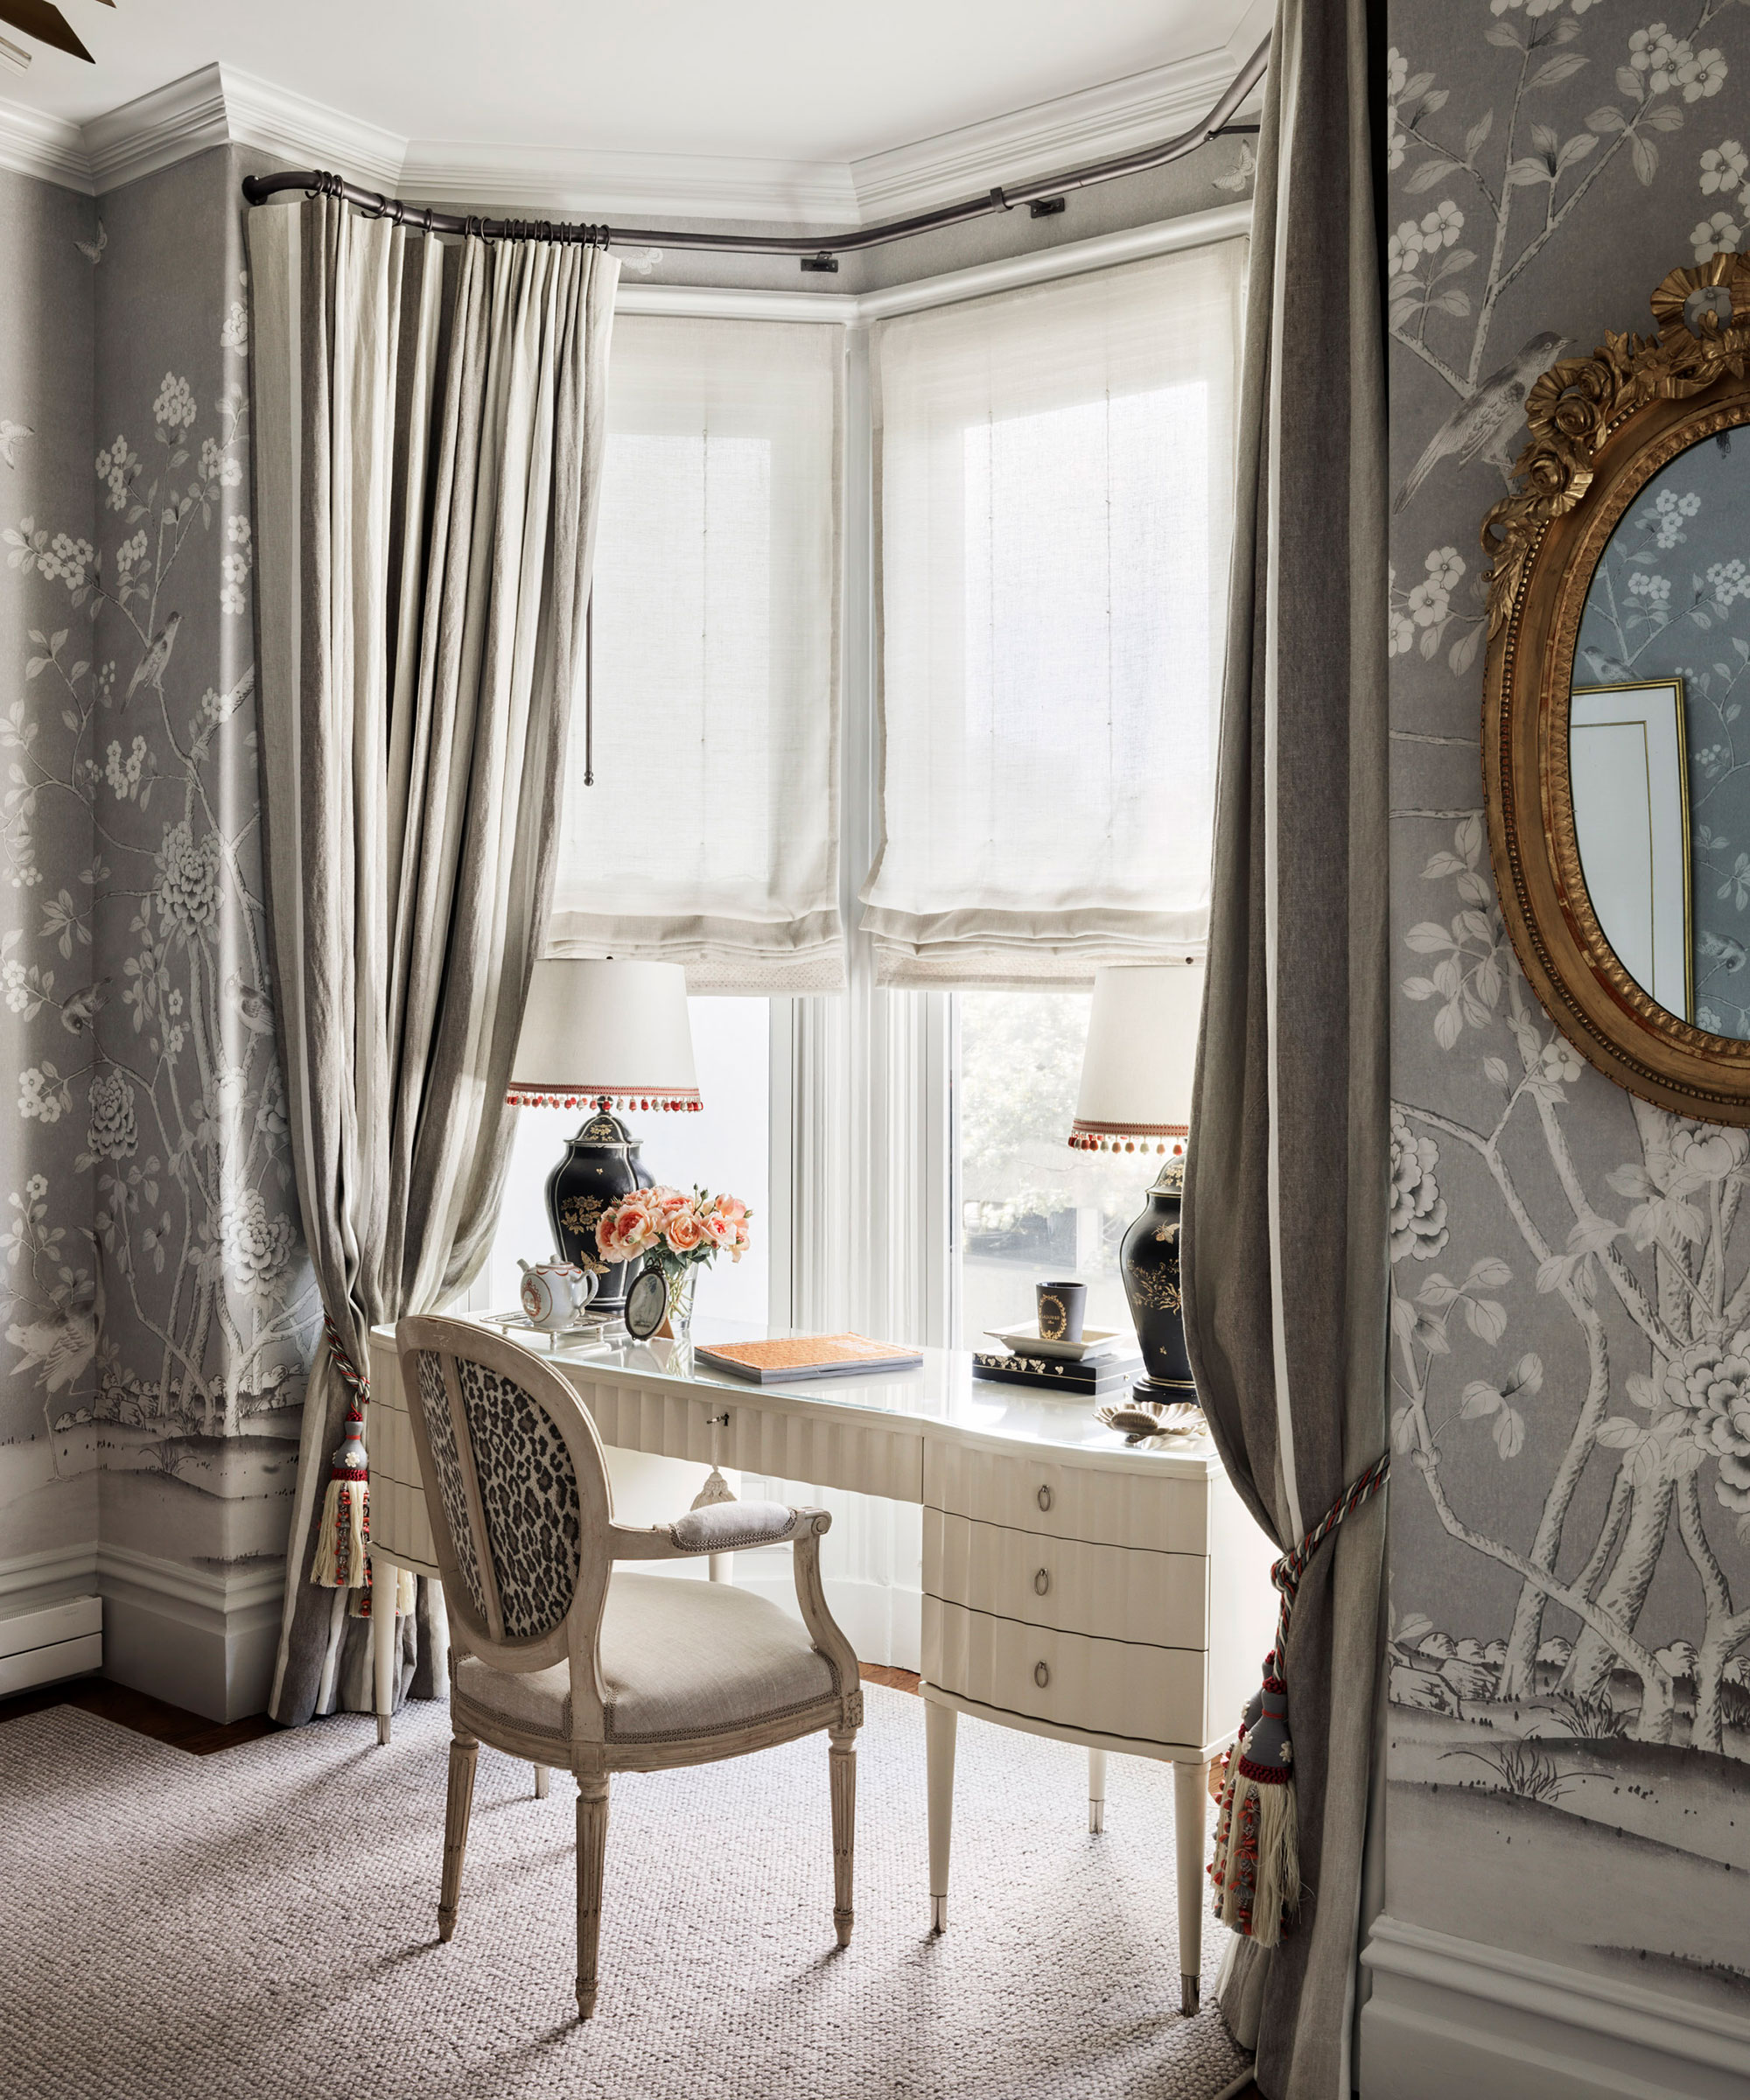 An example of dressing table ideas showing a dressing table with an upholstered leopard print chair sitting in a bay window